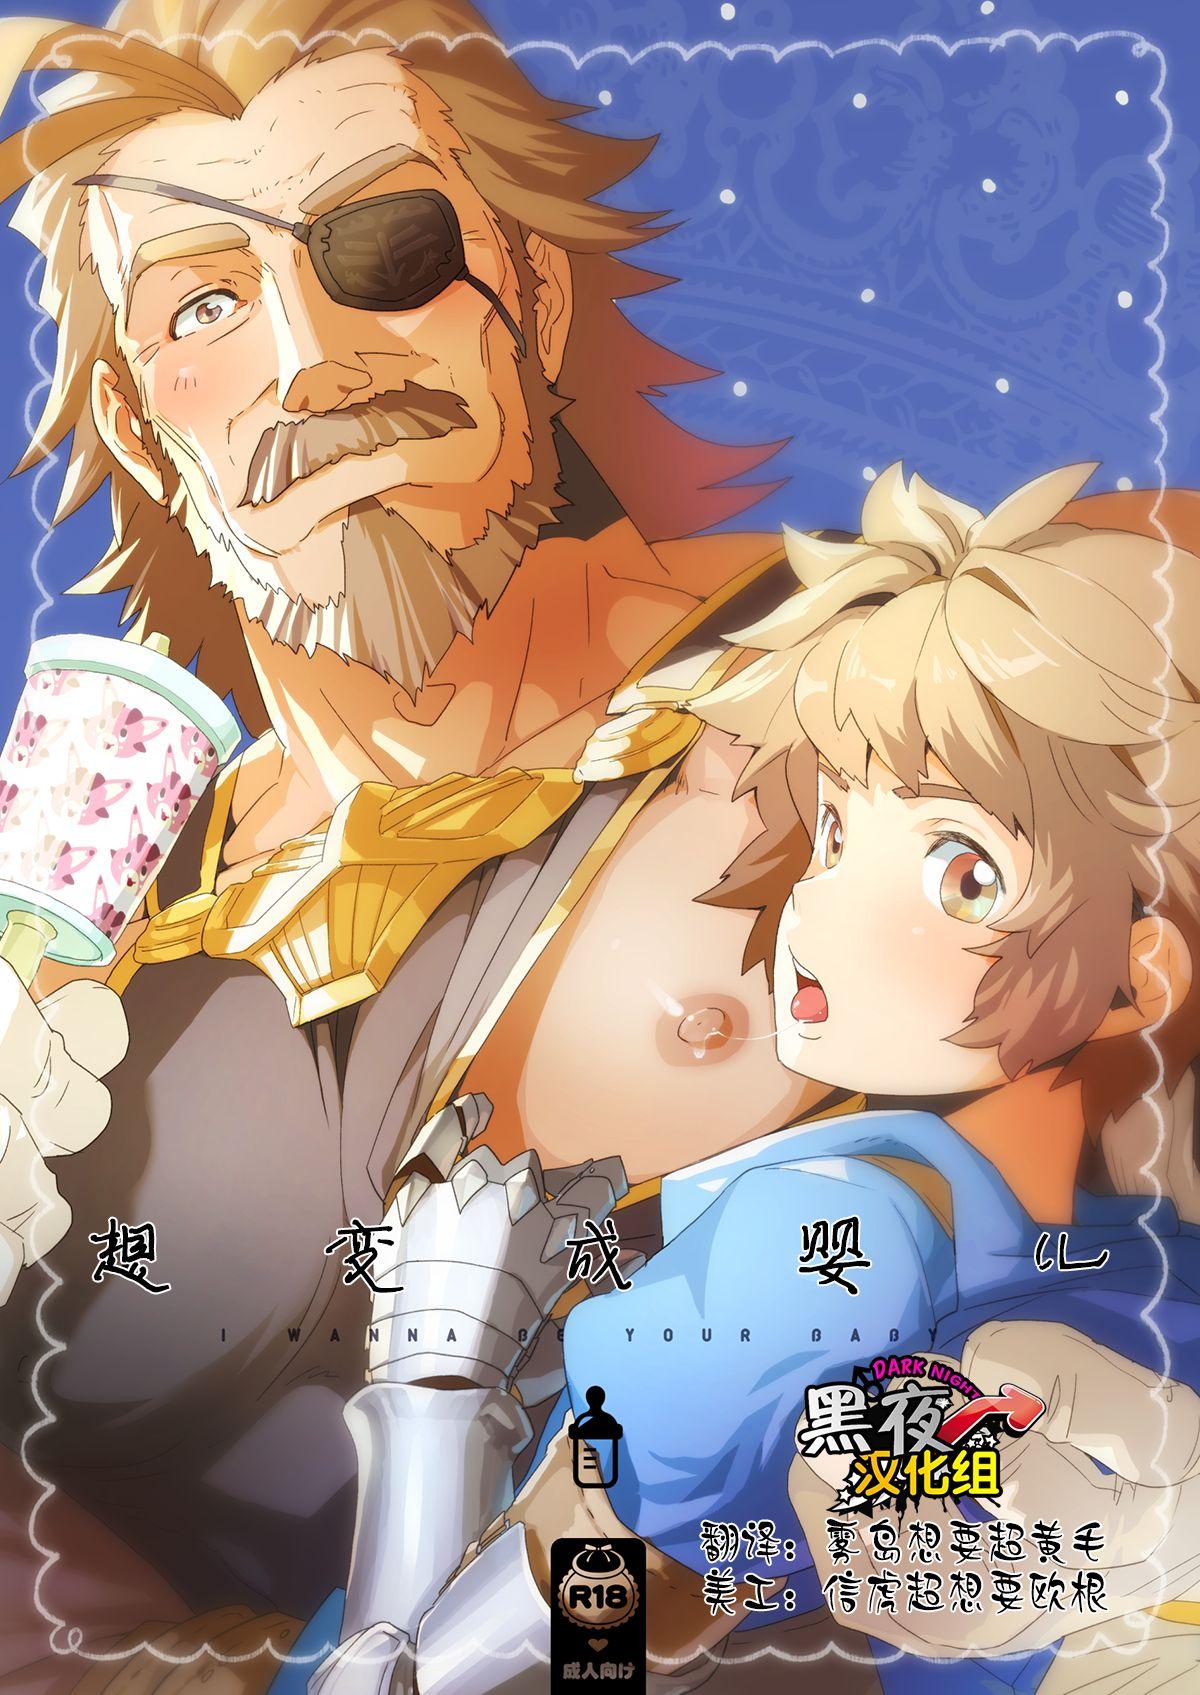 Cum Wanna be baby | 想变成婴儿 - Granblue fantasy Hairy - Page 1